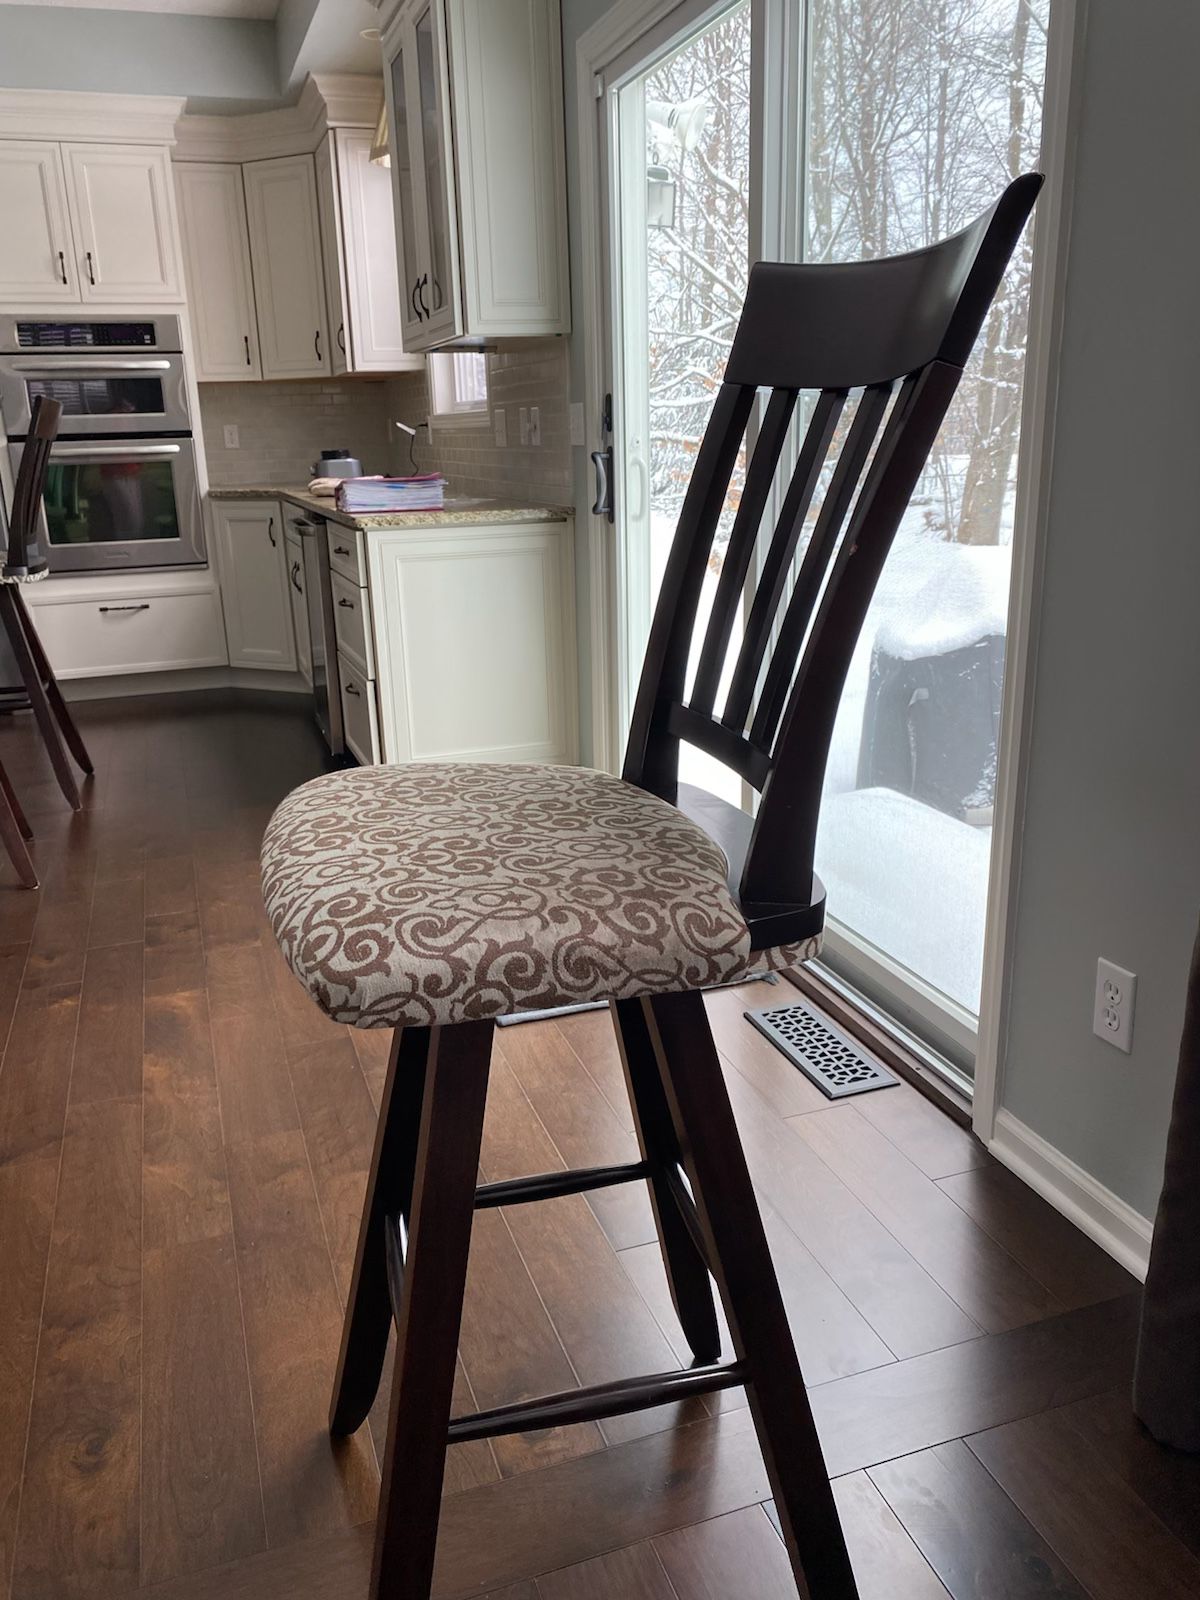 Custom Swivel Bar Stools (5 In total) and matching Desk Chair 